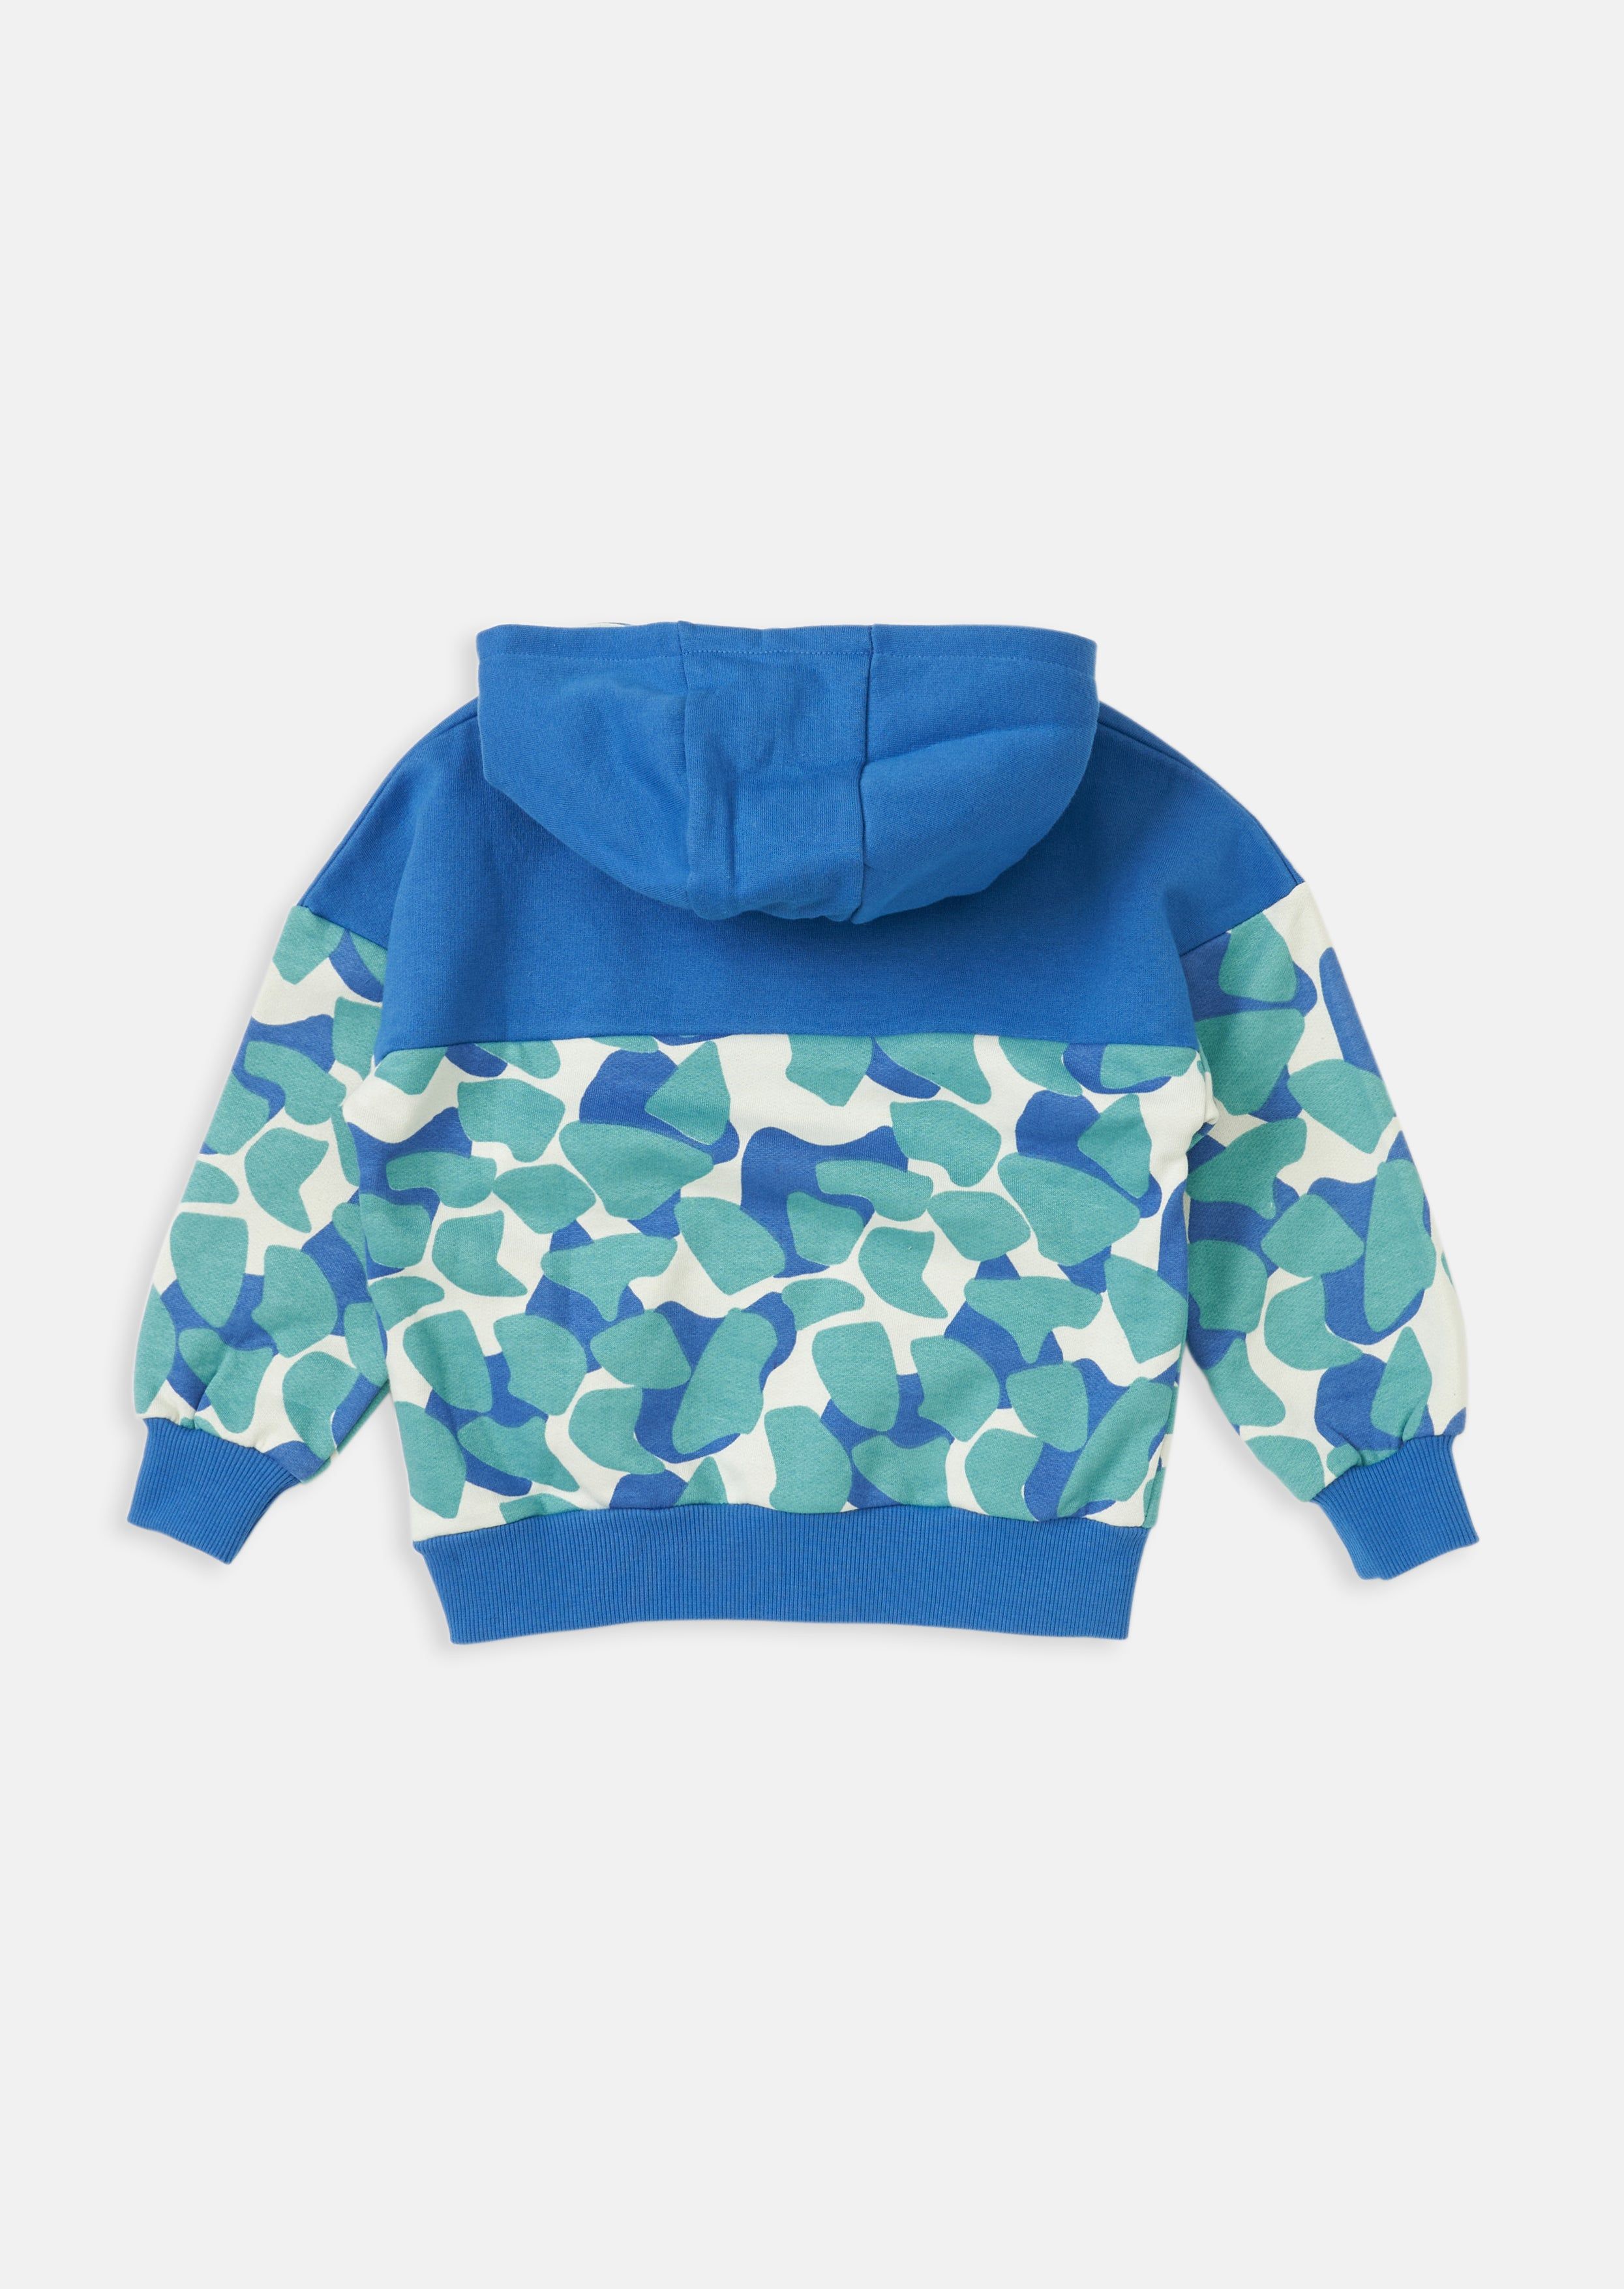 It’s all about power prints right now. Update your fitness fashion collection with this gorgeous camo print hoodie. Super soft brushed sweatshirt with added stretch. Colourblocked yolk and lined hood  performance zips and logo print.  Model wears 10y  she is 9 years old and 140cm tall.  Angel & Rocket cares - made with Fairtrade cotton  Colour: Blue  96% Cotton 4% Elastane  Look after me – Think planet  wash at 30c